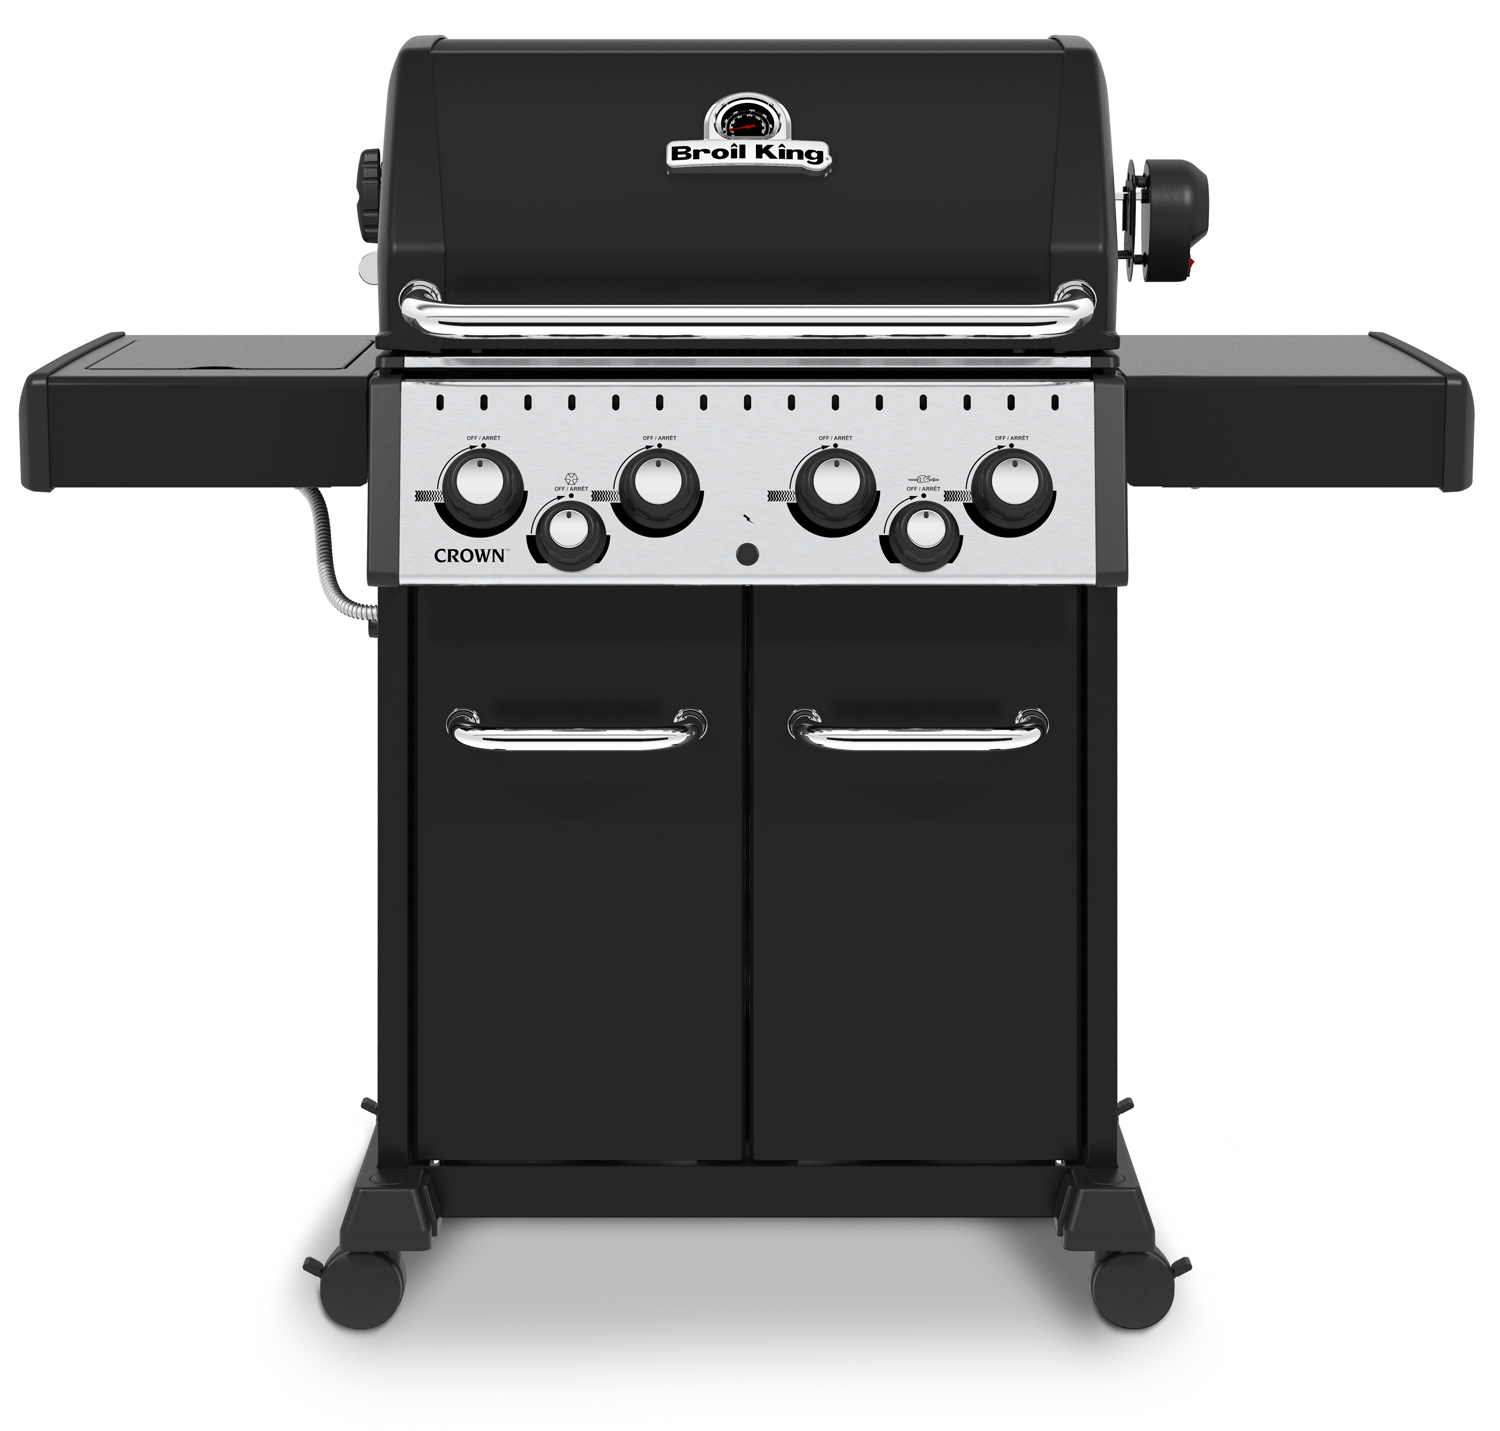 Broil King Crown 490 Gasgrill - Modell 2022